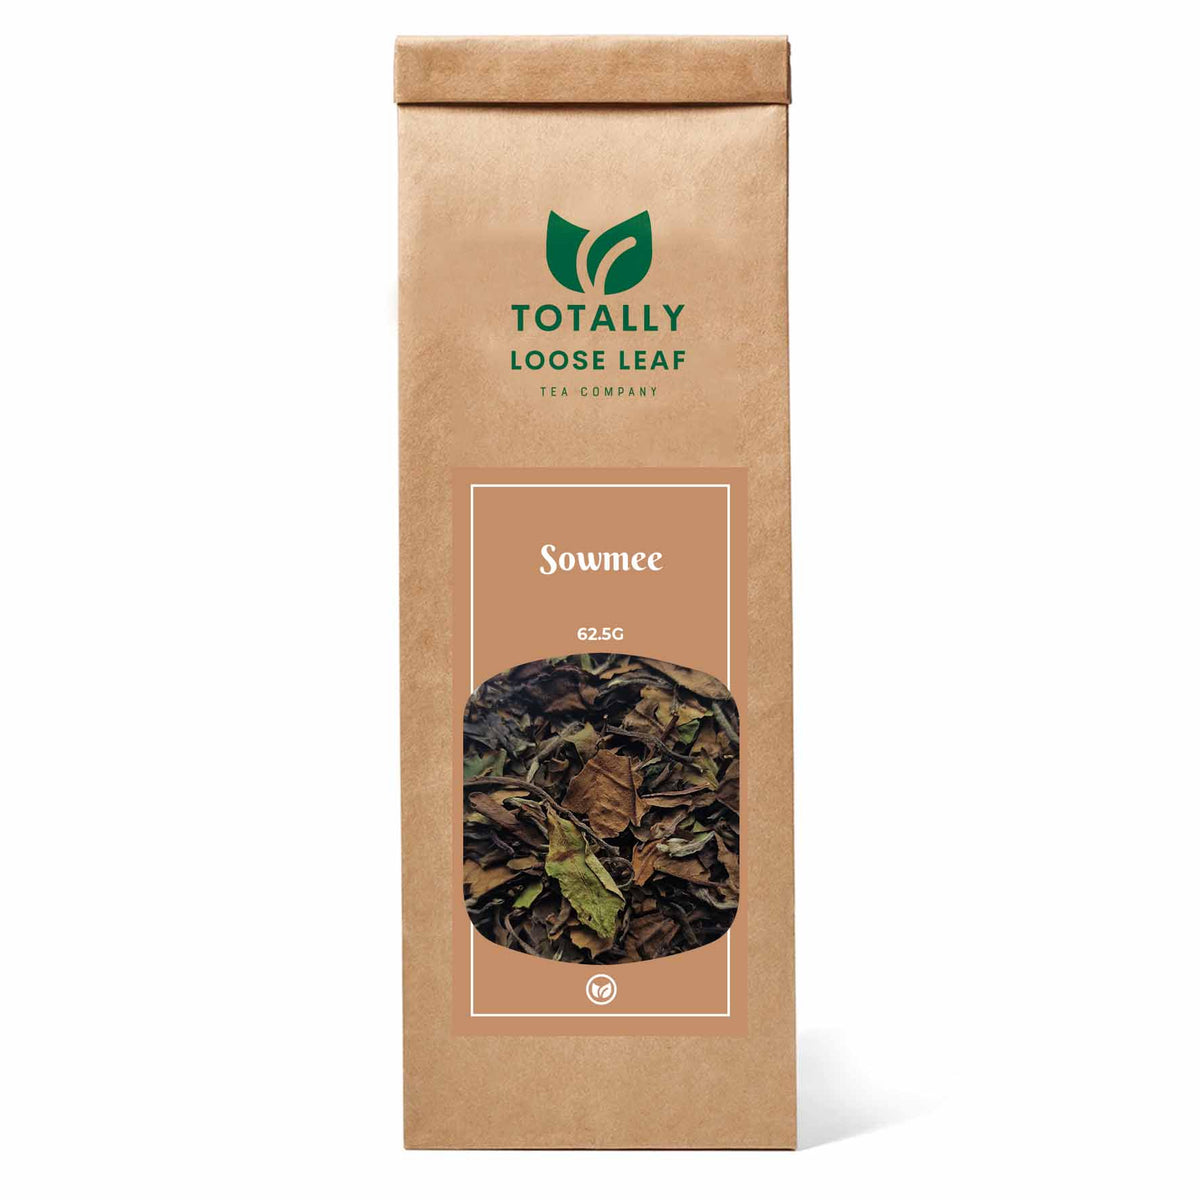 Sowmee White Loose Leaf Tea - one pouch